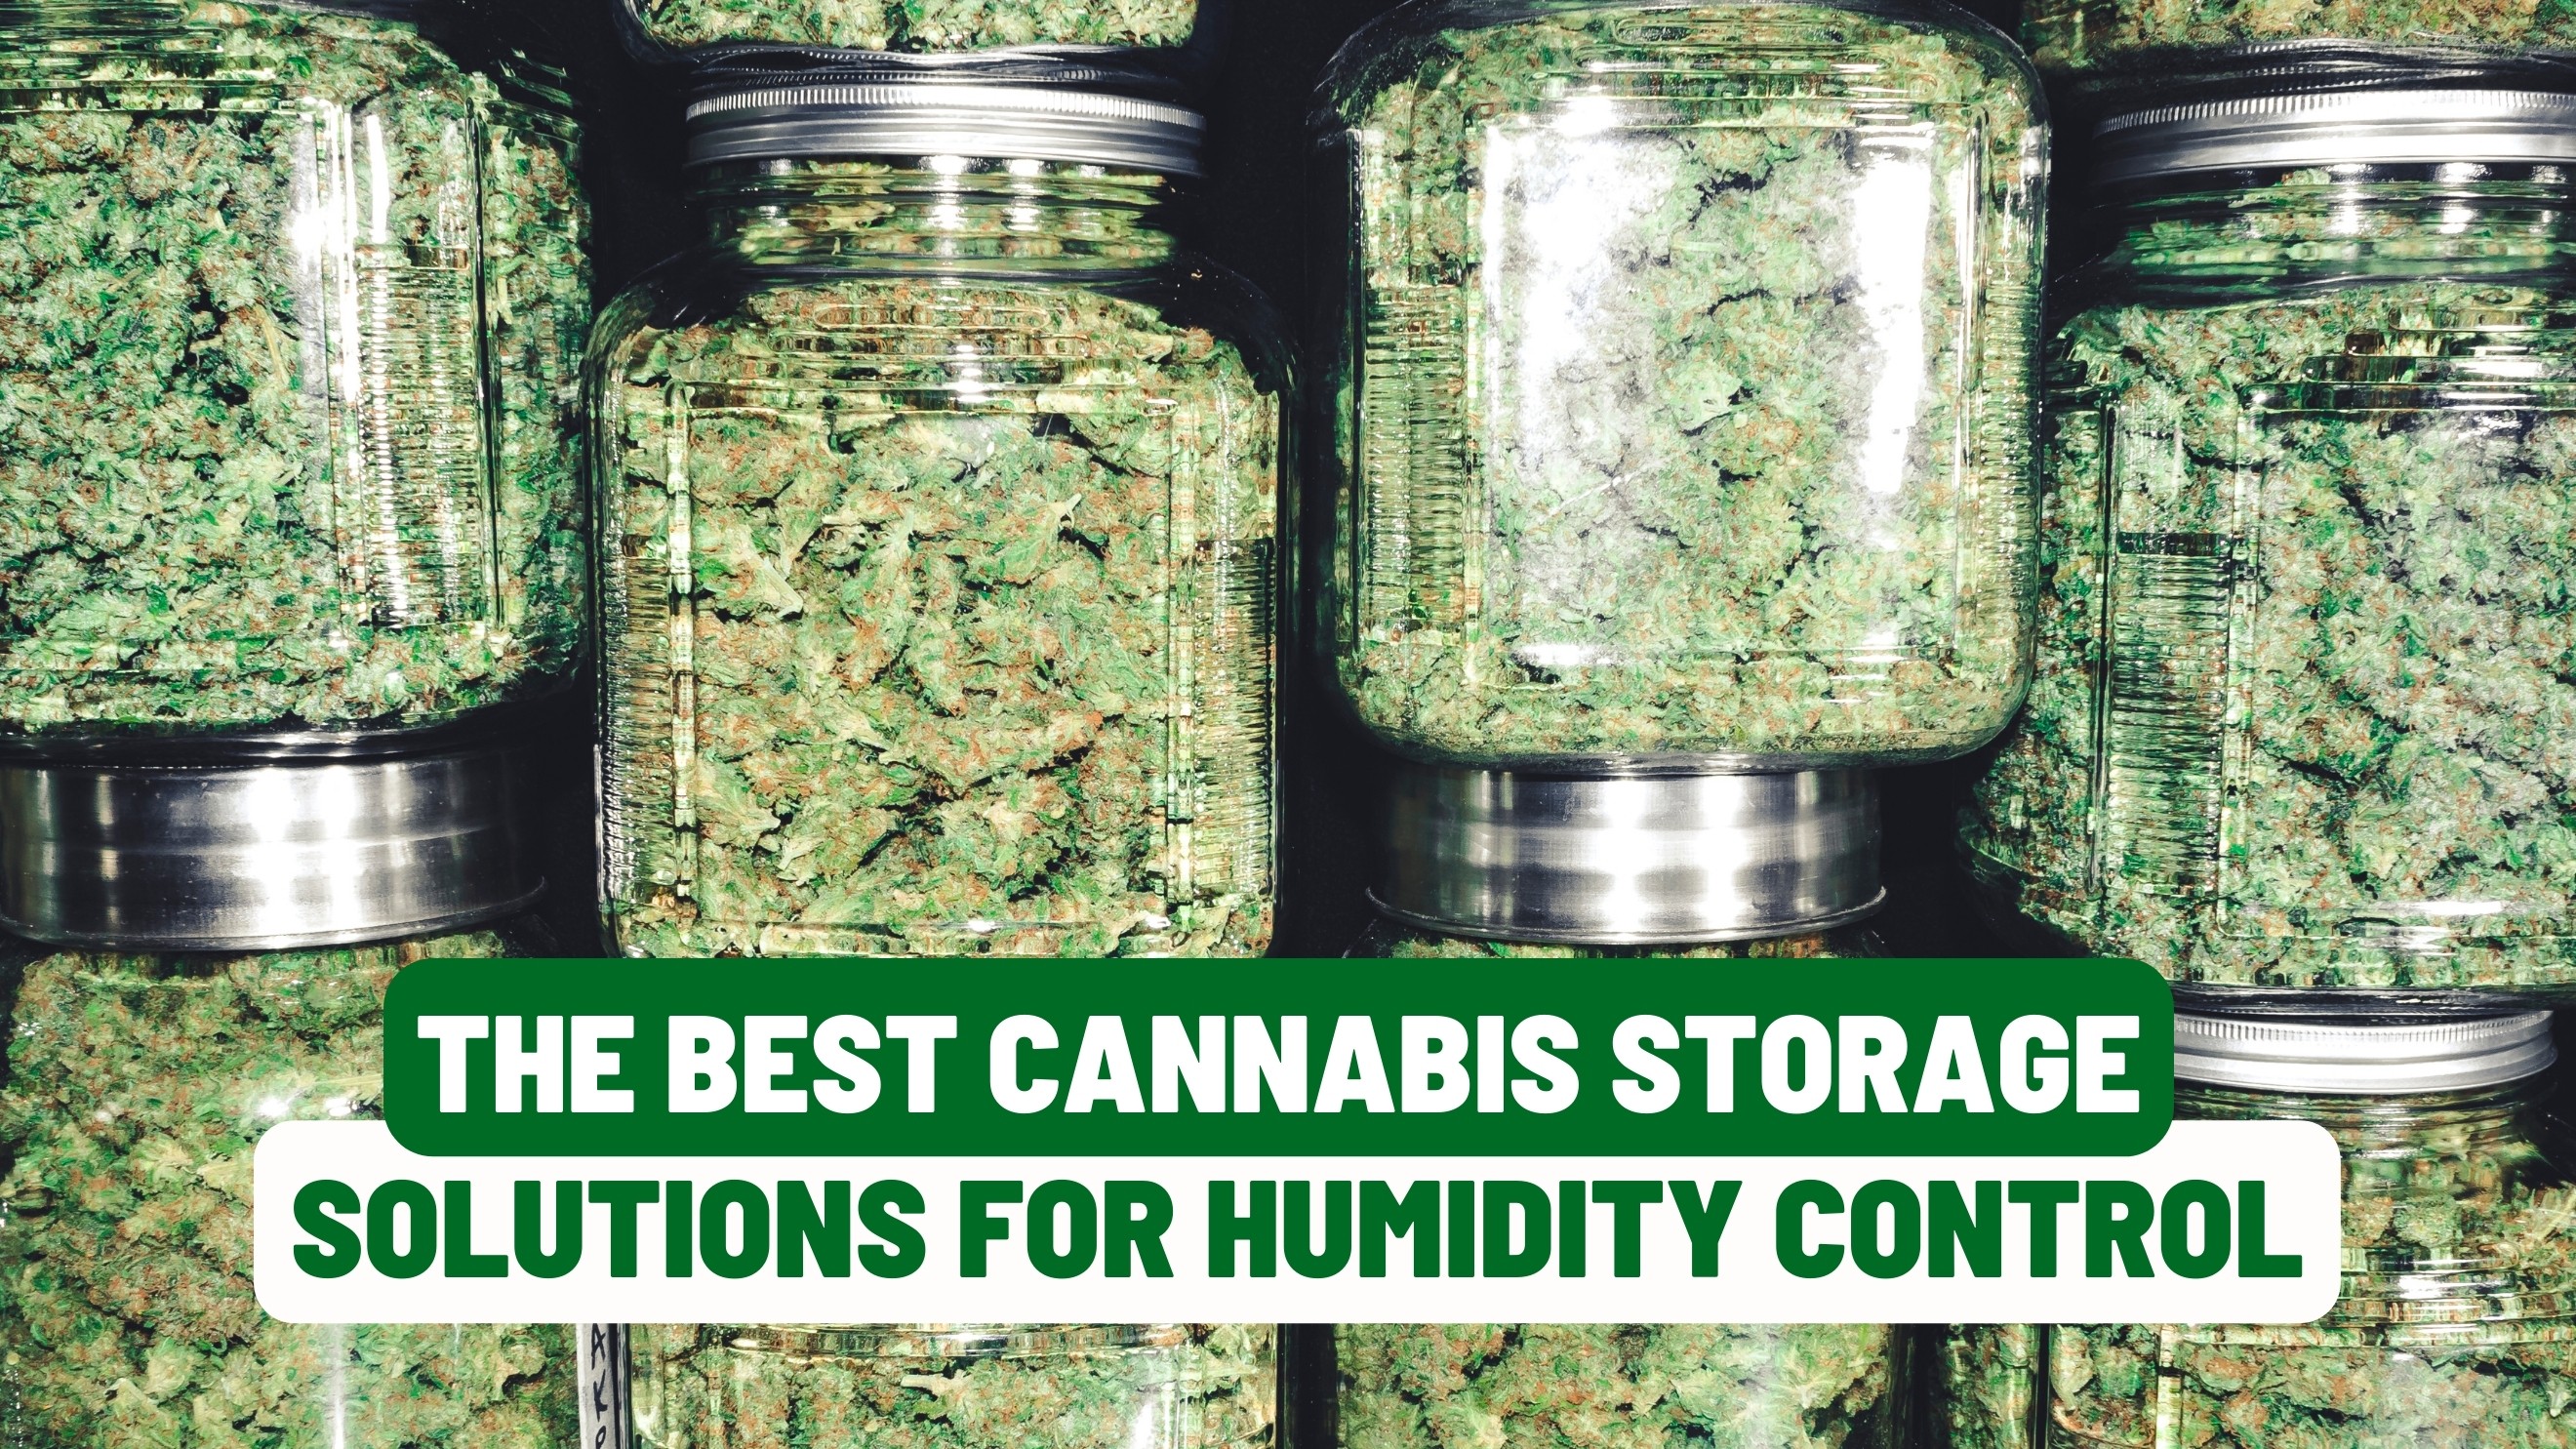 The Best Cannabis Storage Solutions for Humidity Control